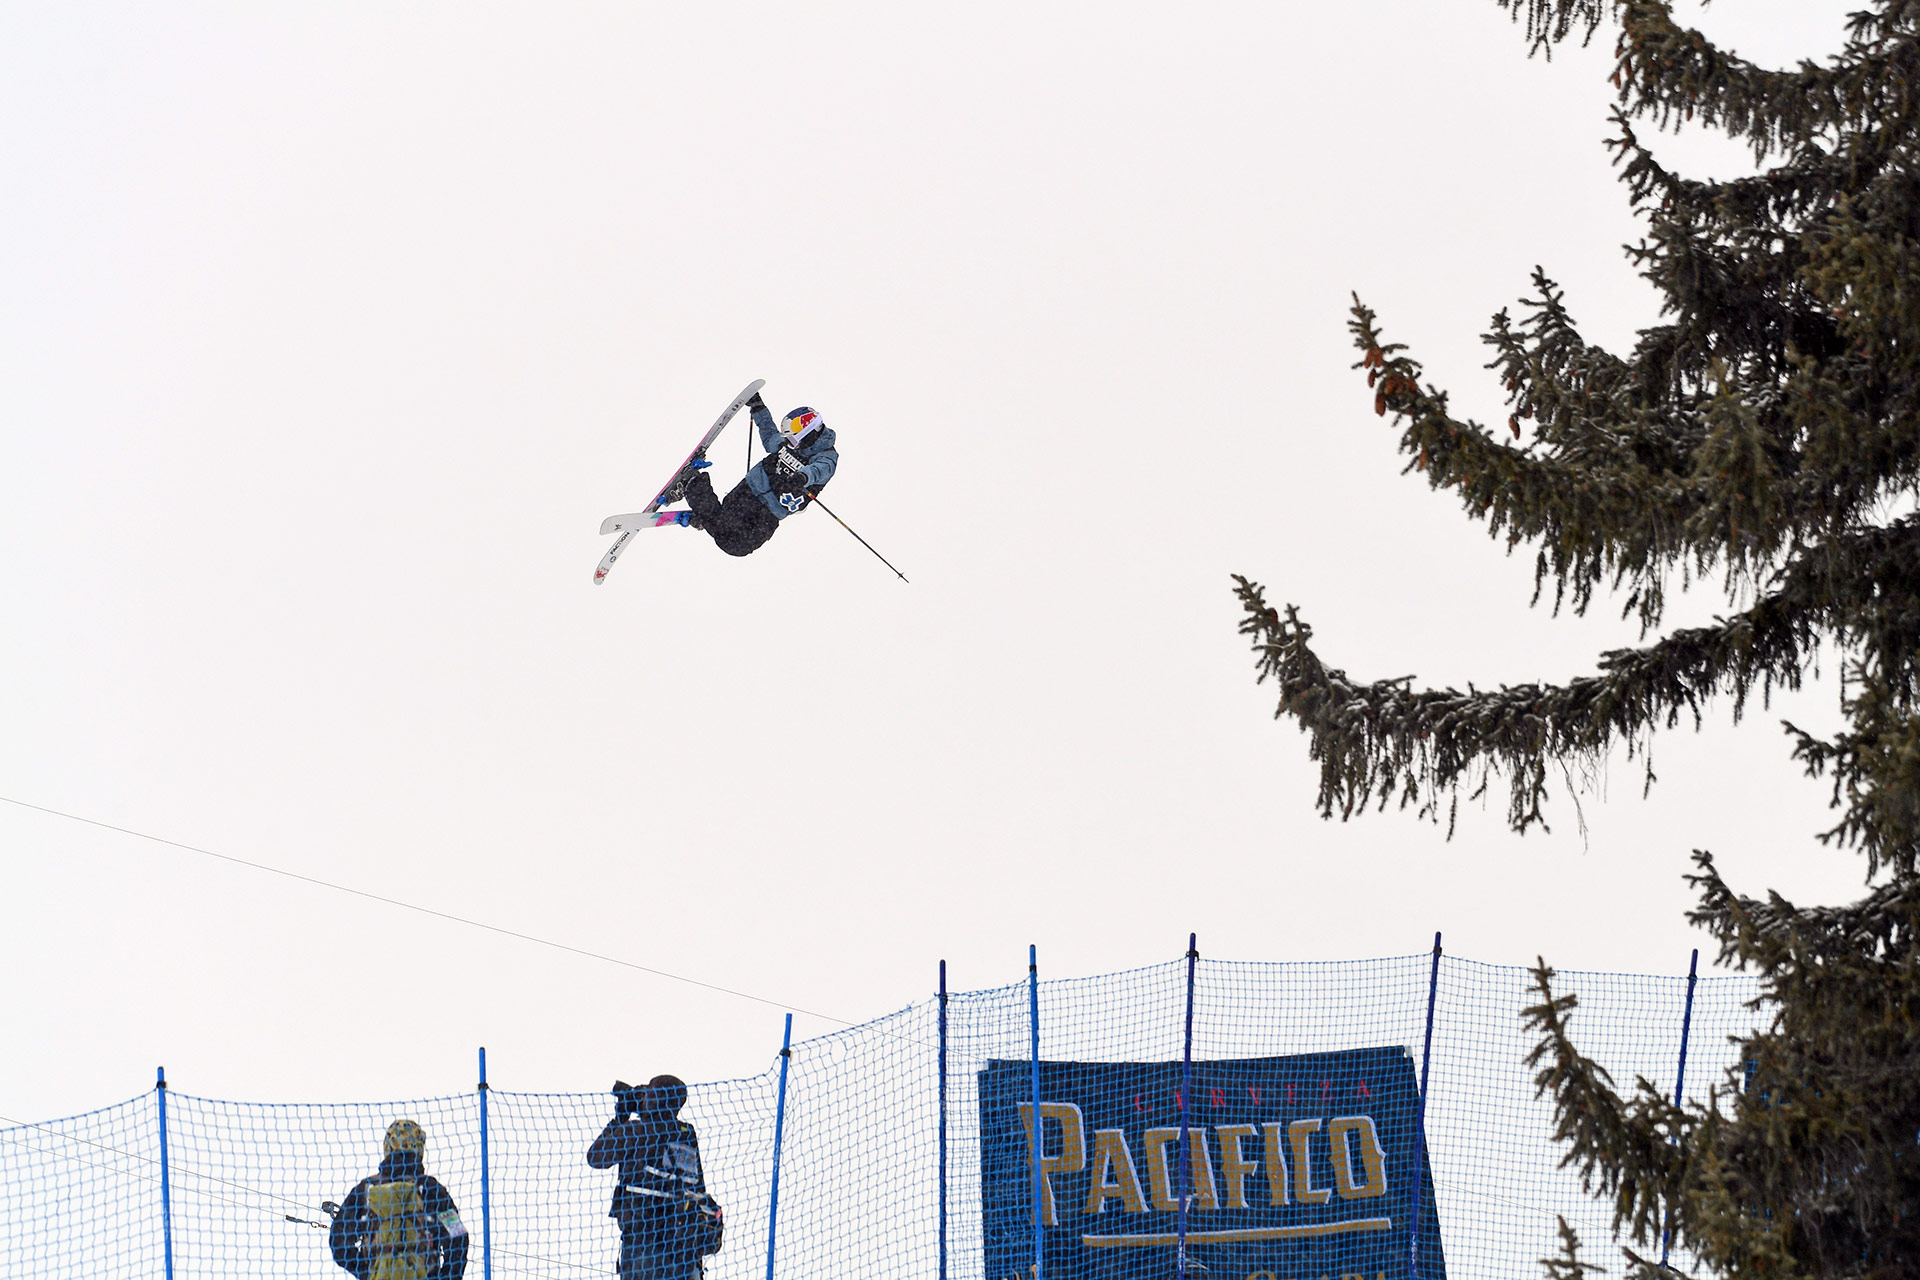 Mathilde Gremaud at the 2022 Winter X Games Big Air